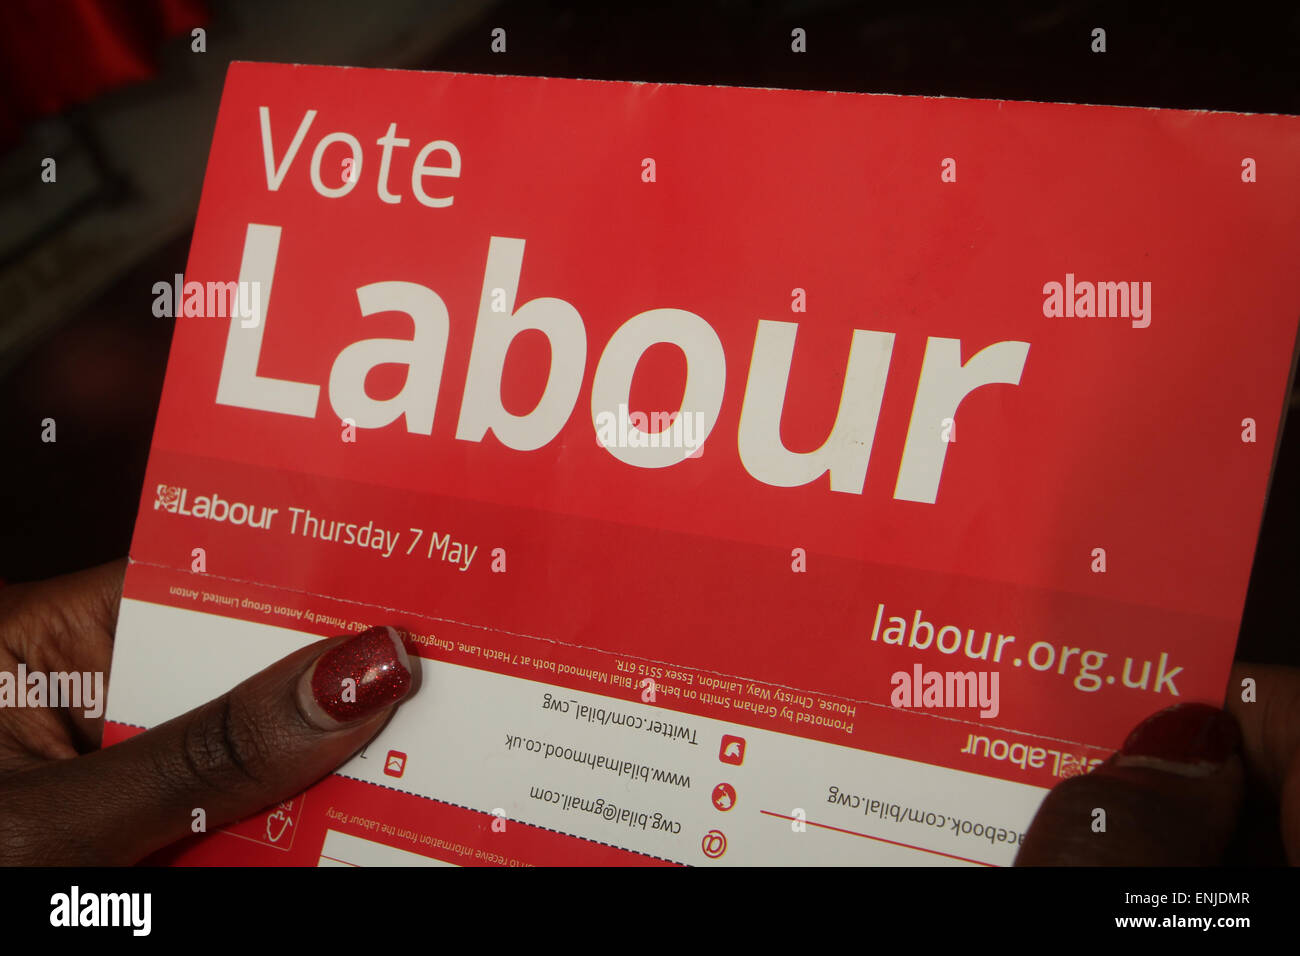 London, UK. 6 May 2015. An immigrant voter reads a Labour election flyer. Voters in the UK prepare to go to the polls on Thursday 7 May, in an election seen as one of the closest-fought in years. Britain's two-party system appears under severe threat, with the distinct prospect that between them Labour and the Conservatives will struggle to gain two-thirds of the votes cast. Compare that with their near 90% vote share just 50 years ago. Credit: David Mbiyu. immigrant voter reads a Labour election flyer. Voters in the UK prepare to go to the polls on Thursday 7 May, in an election seen as one o Stock Photo